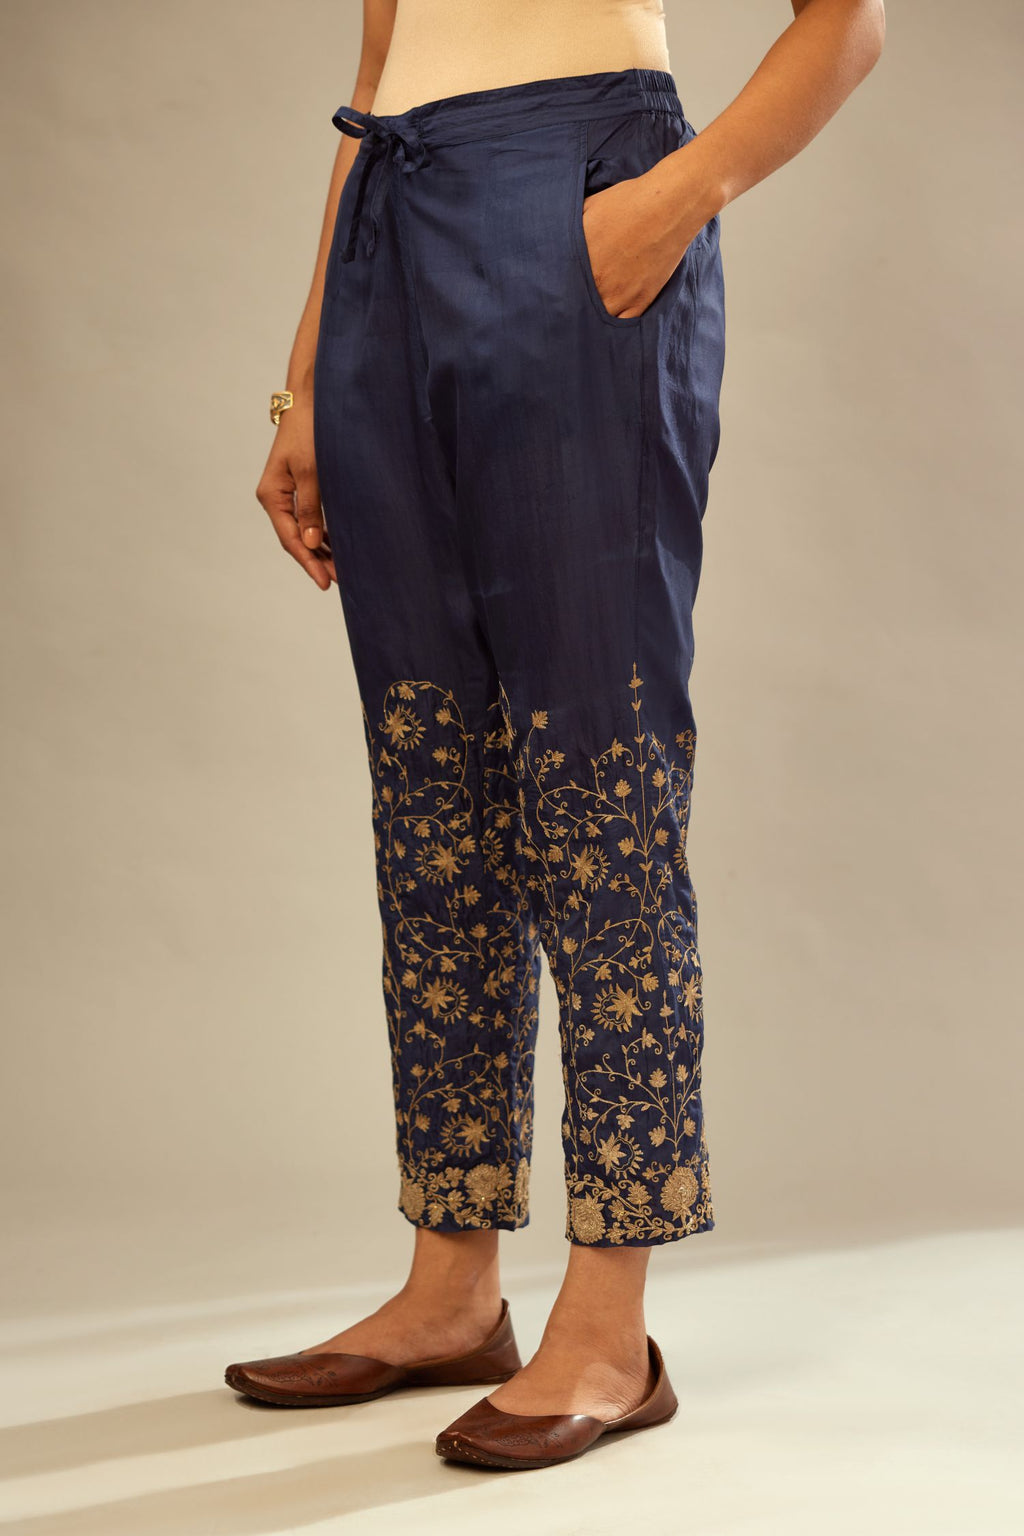 Y.A.S ecco tailored ankle length cigarette pants in navy | ASOS